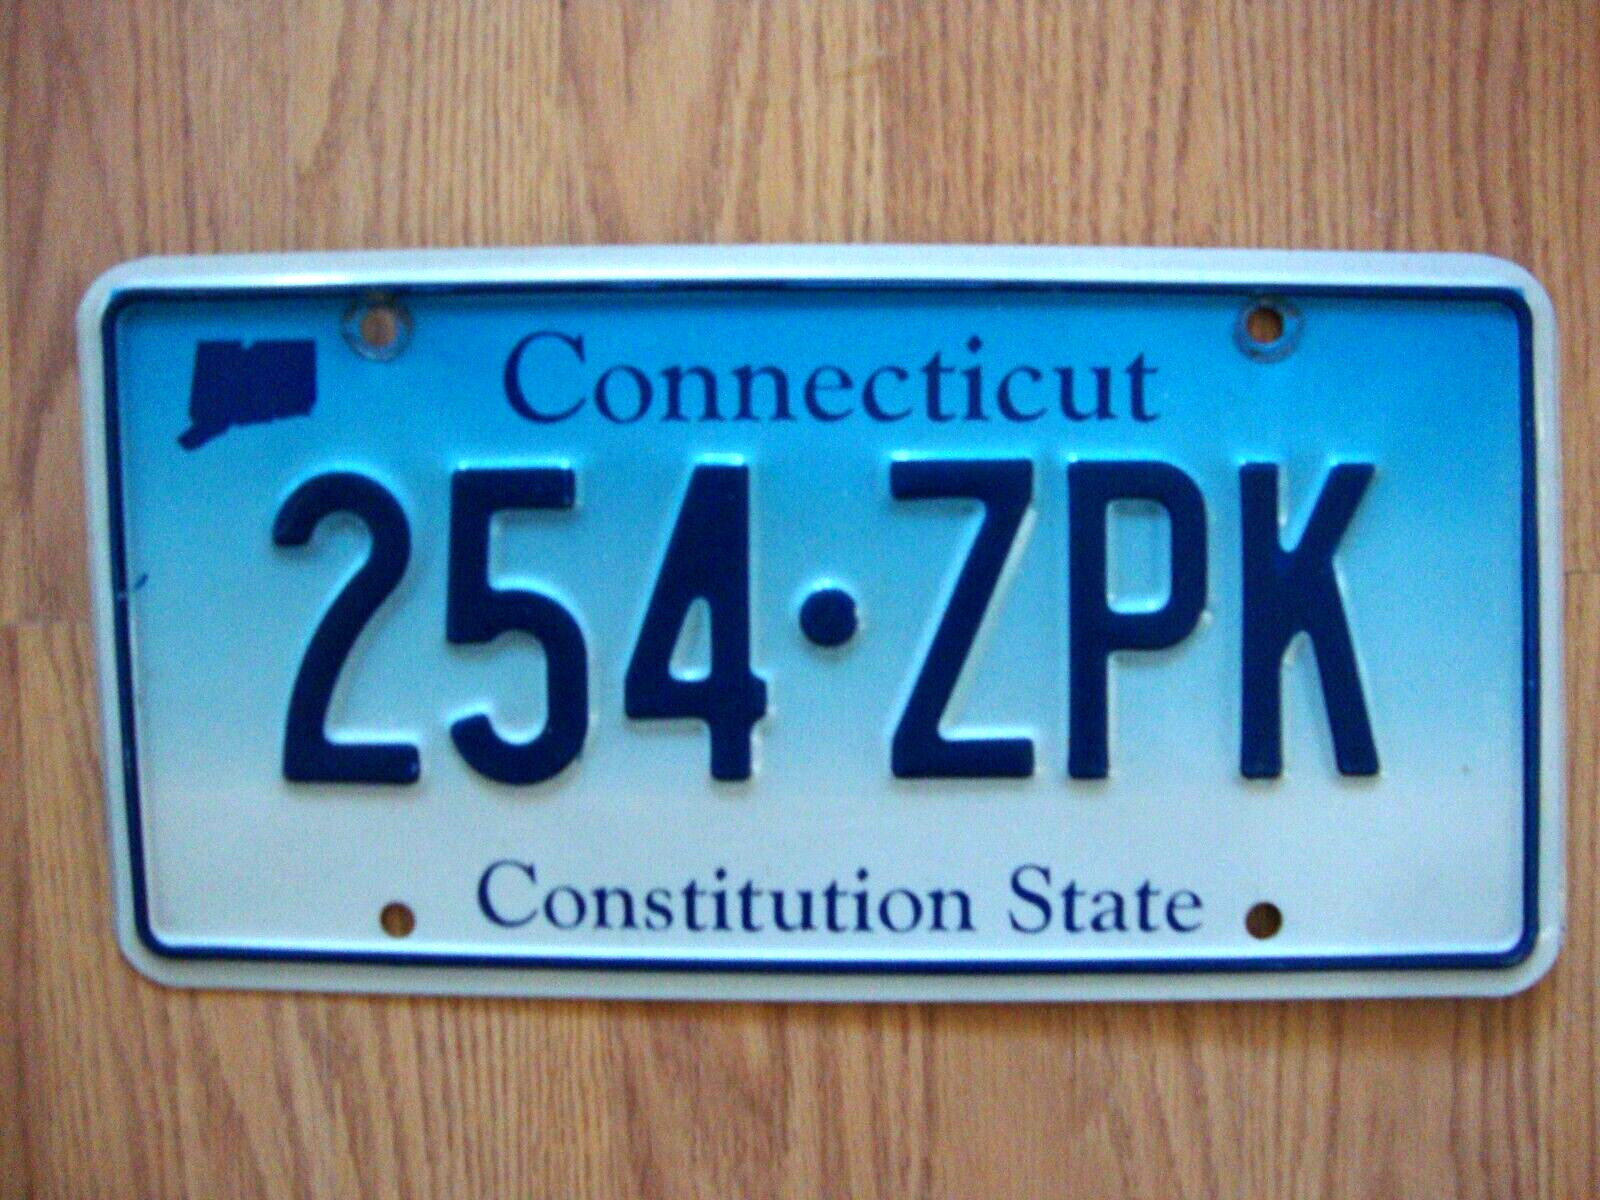 Connecticut Constitution State license plate for Bar Shop Garage or Man Cave